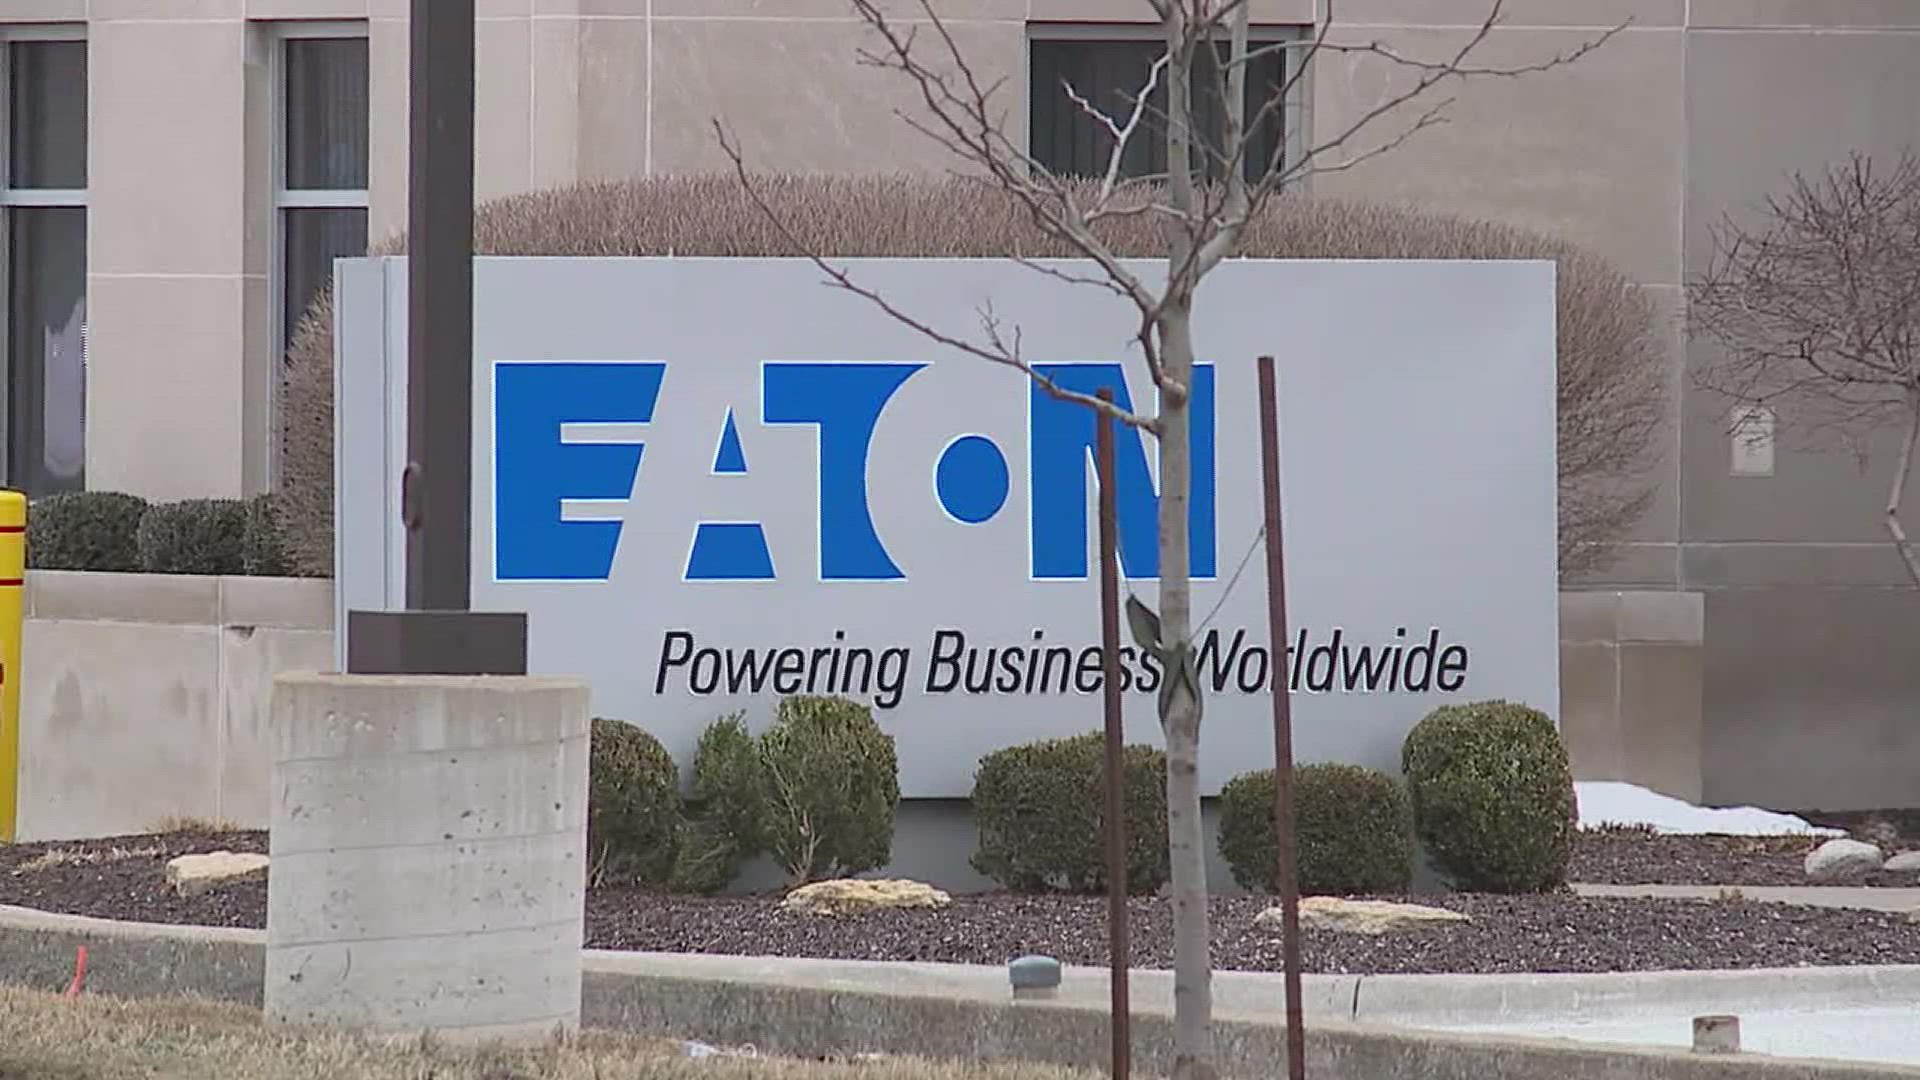 The company was formerly known as Cobham Mission Systems and was bought by Eaton in February of 2021.